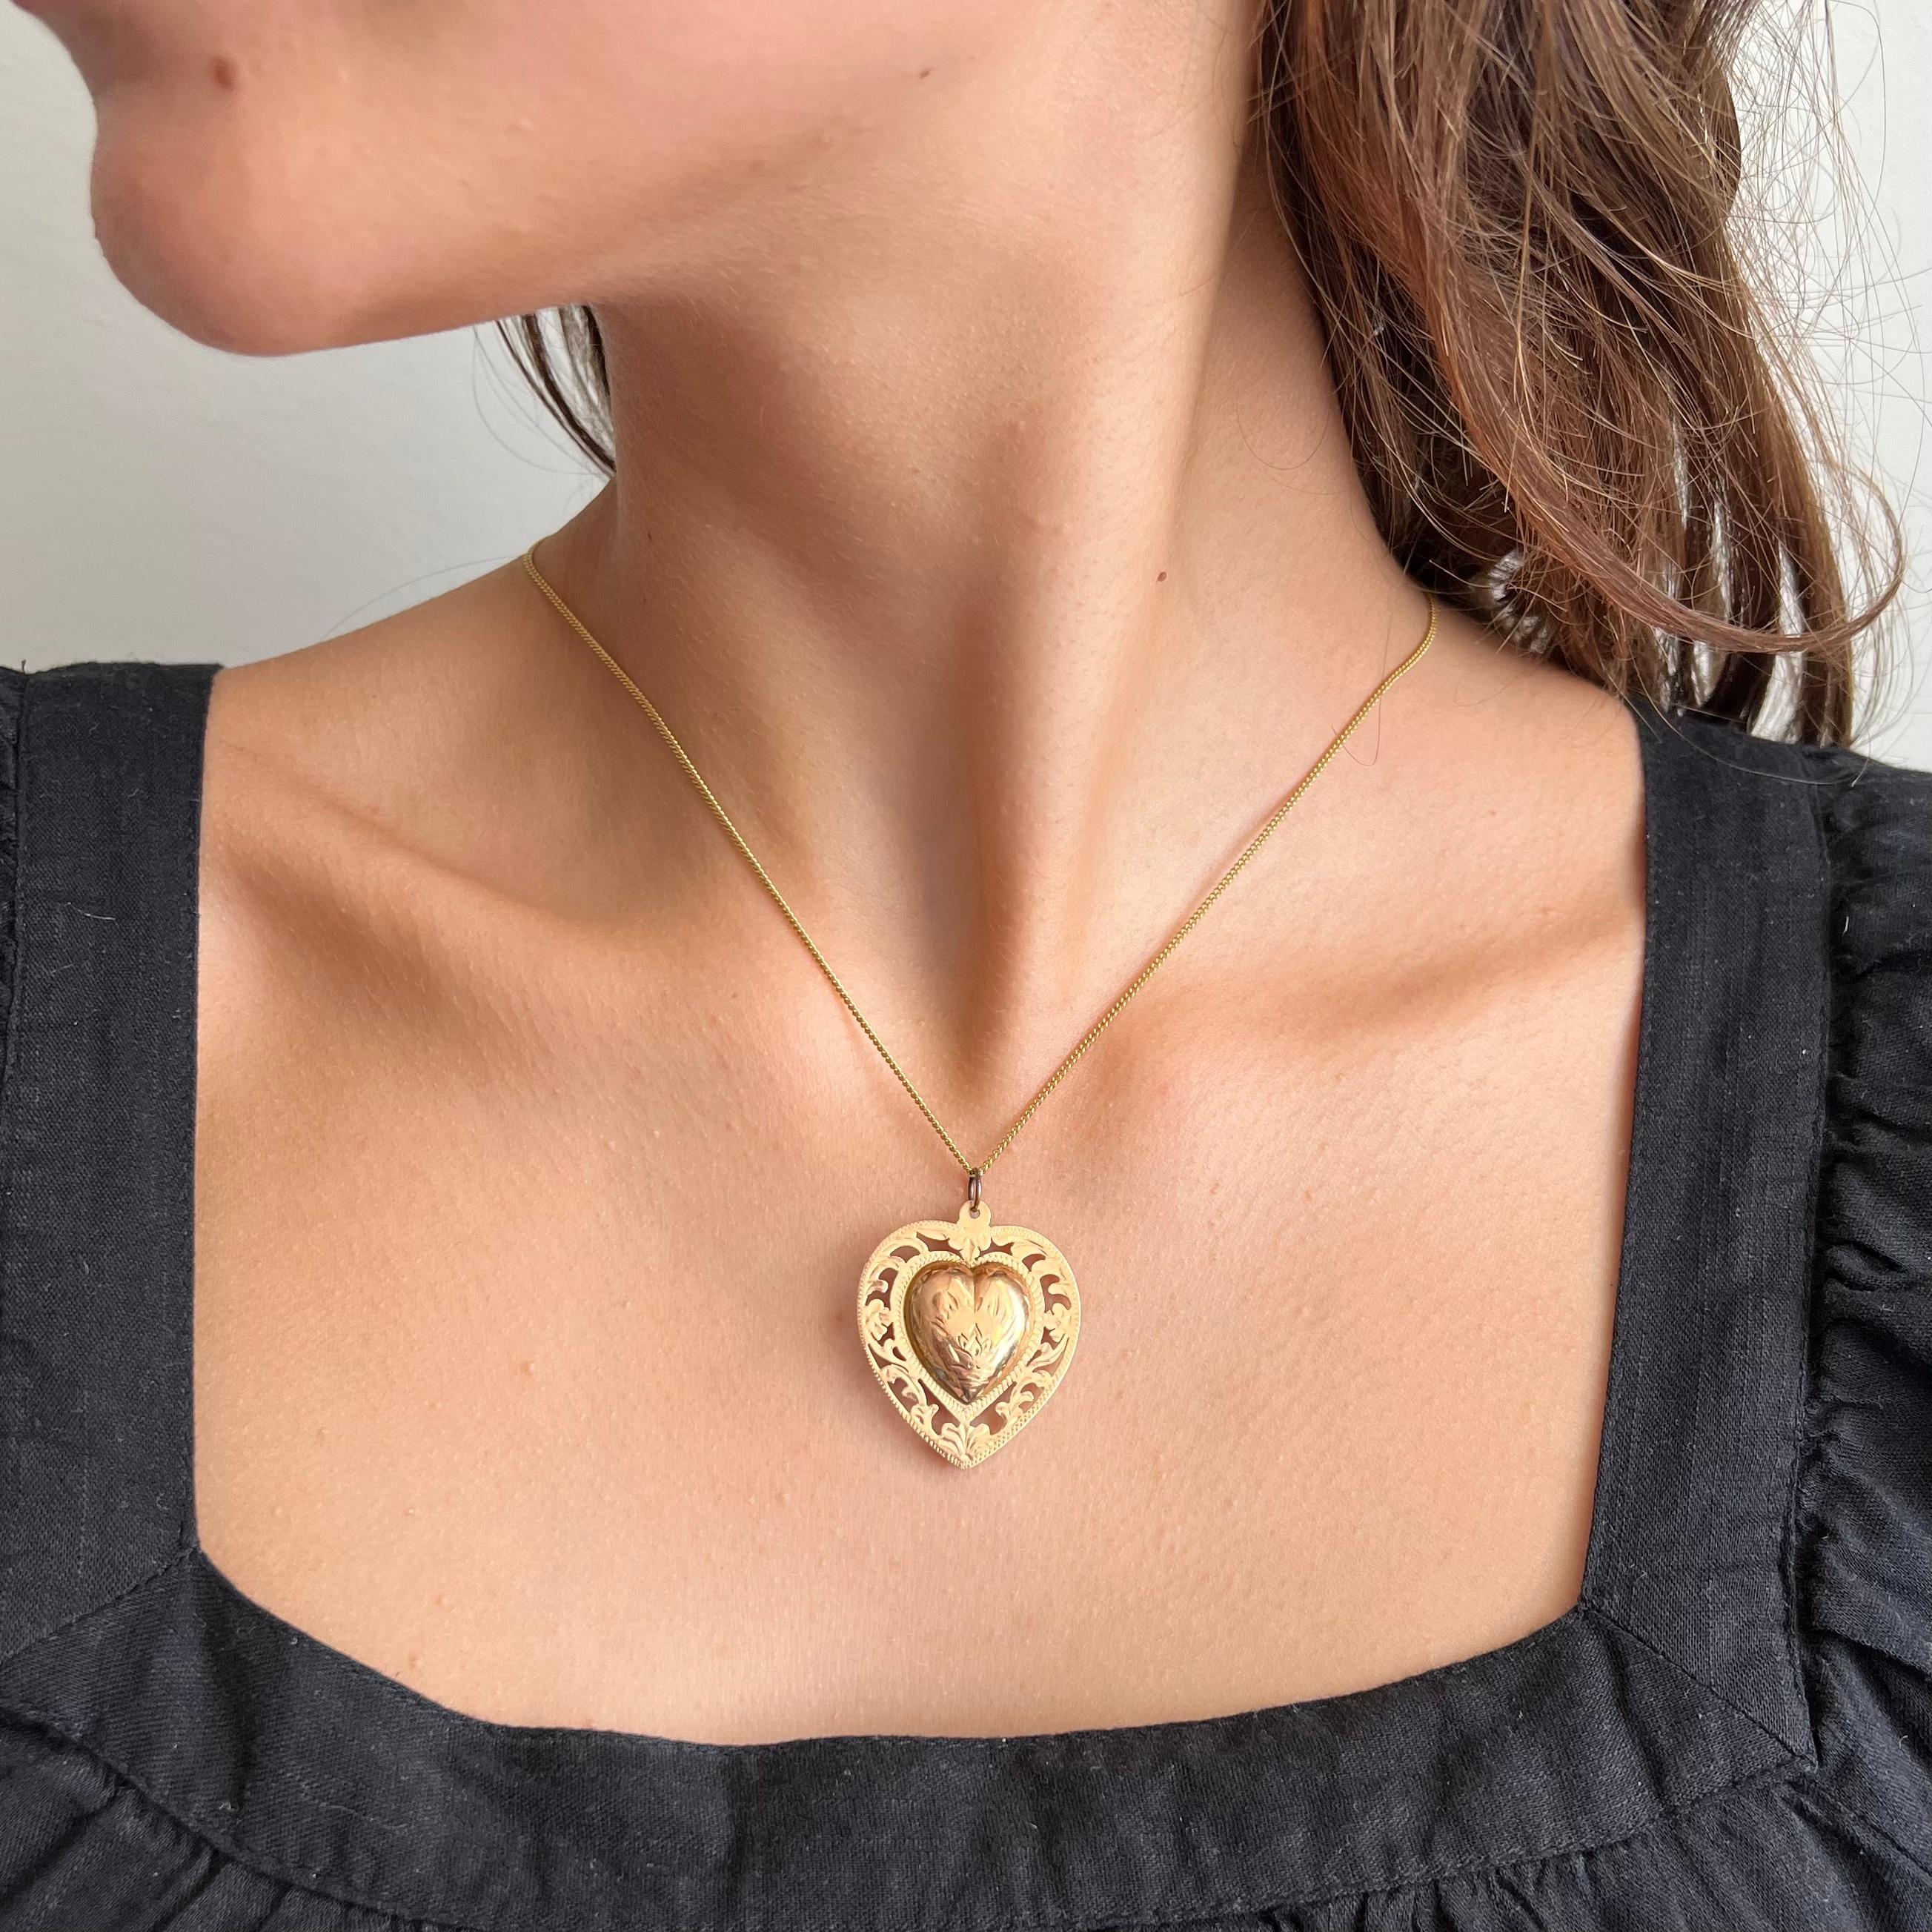 A large Victorian 14 karat yellow gold locket heart pendant. This lovely heart design features an openwork border with a scrolling floral pattern of leaves and flowers. The center of the puffy heart has beautiful engraved details. The back of the